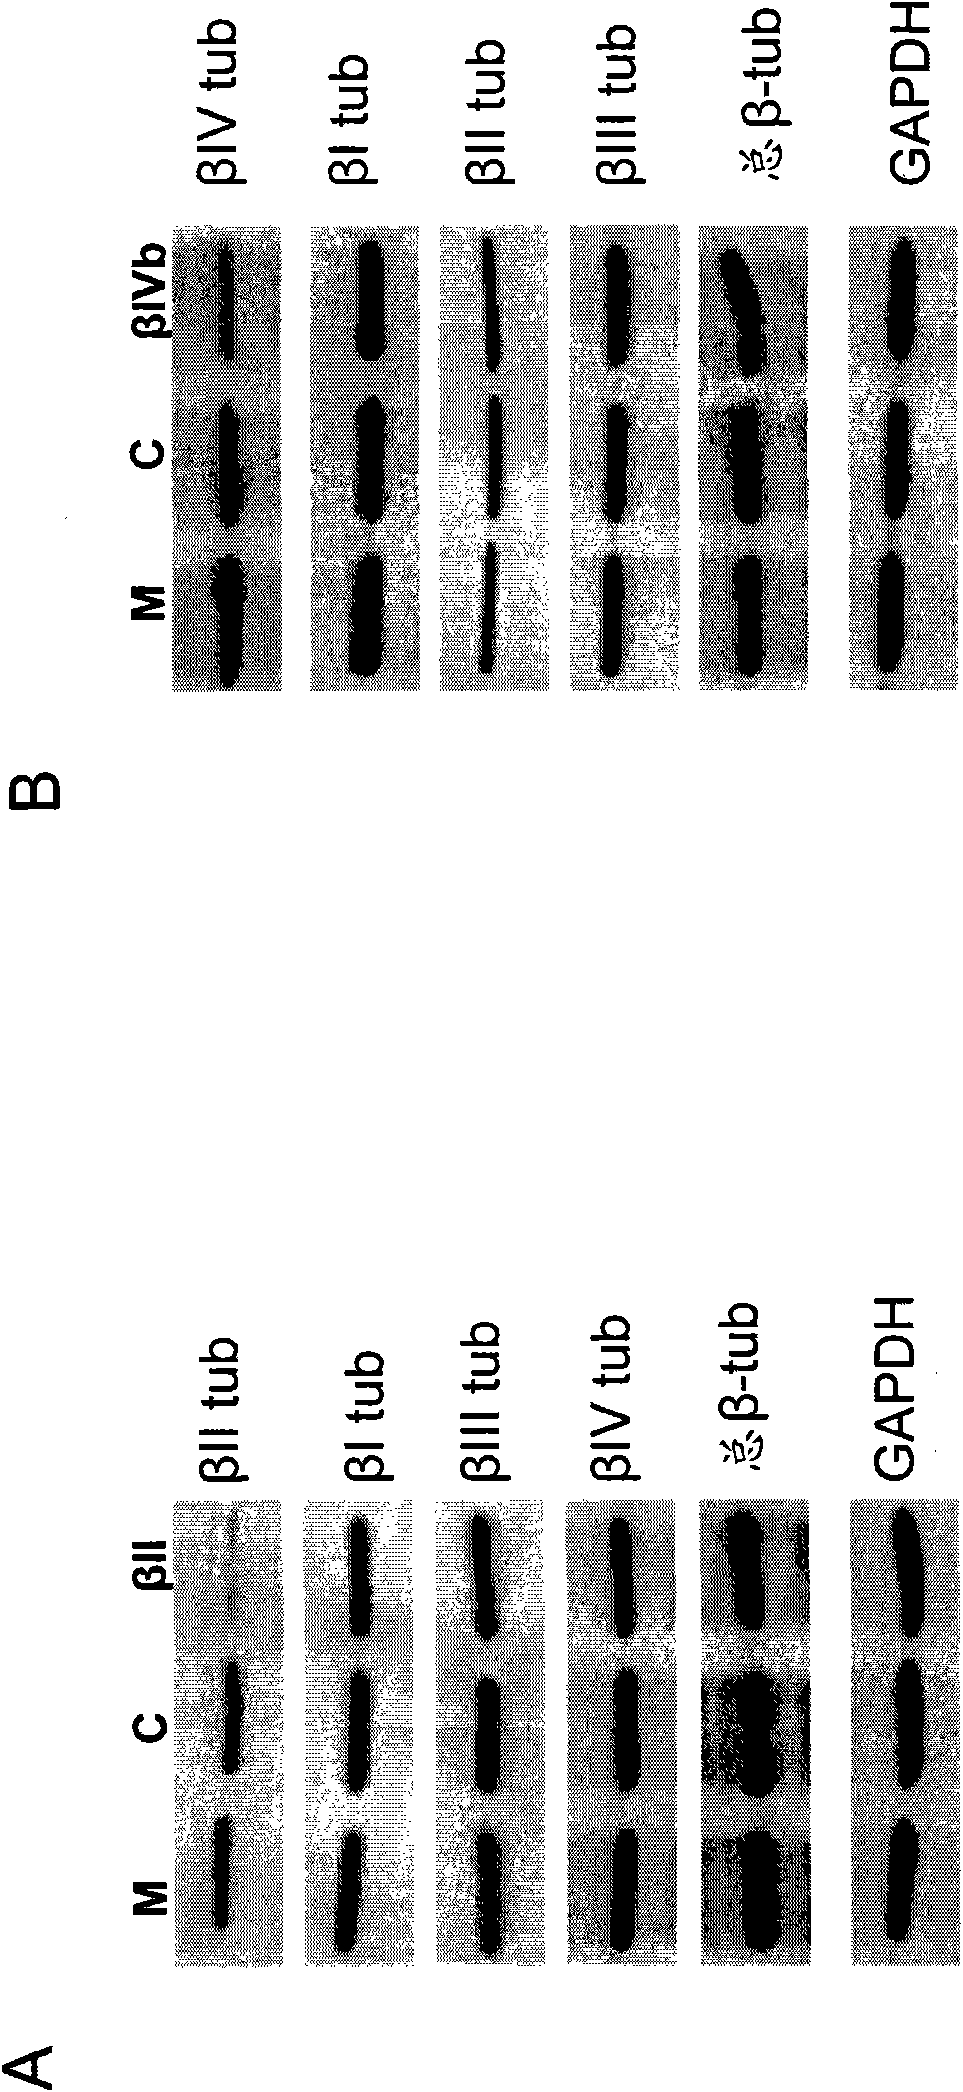 Methods for detecting and modulating the sensitivity of tumour cells to anti-mitotic agents